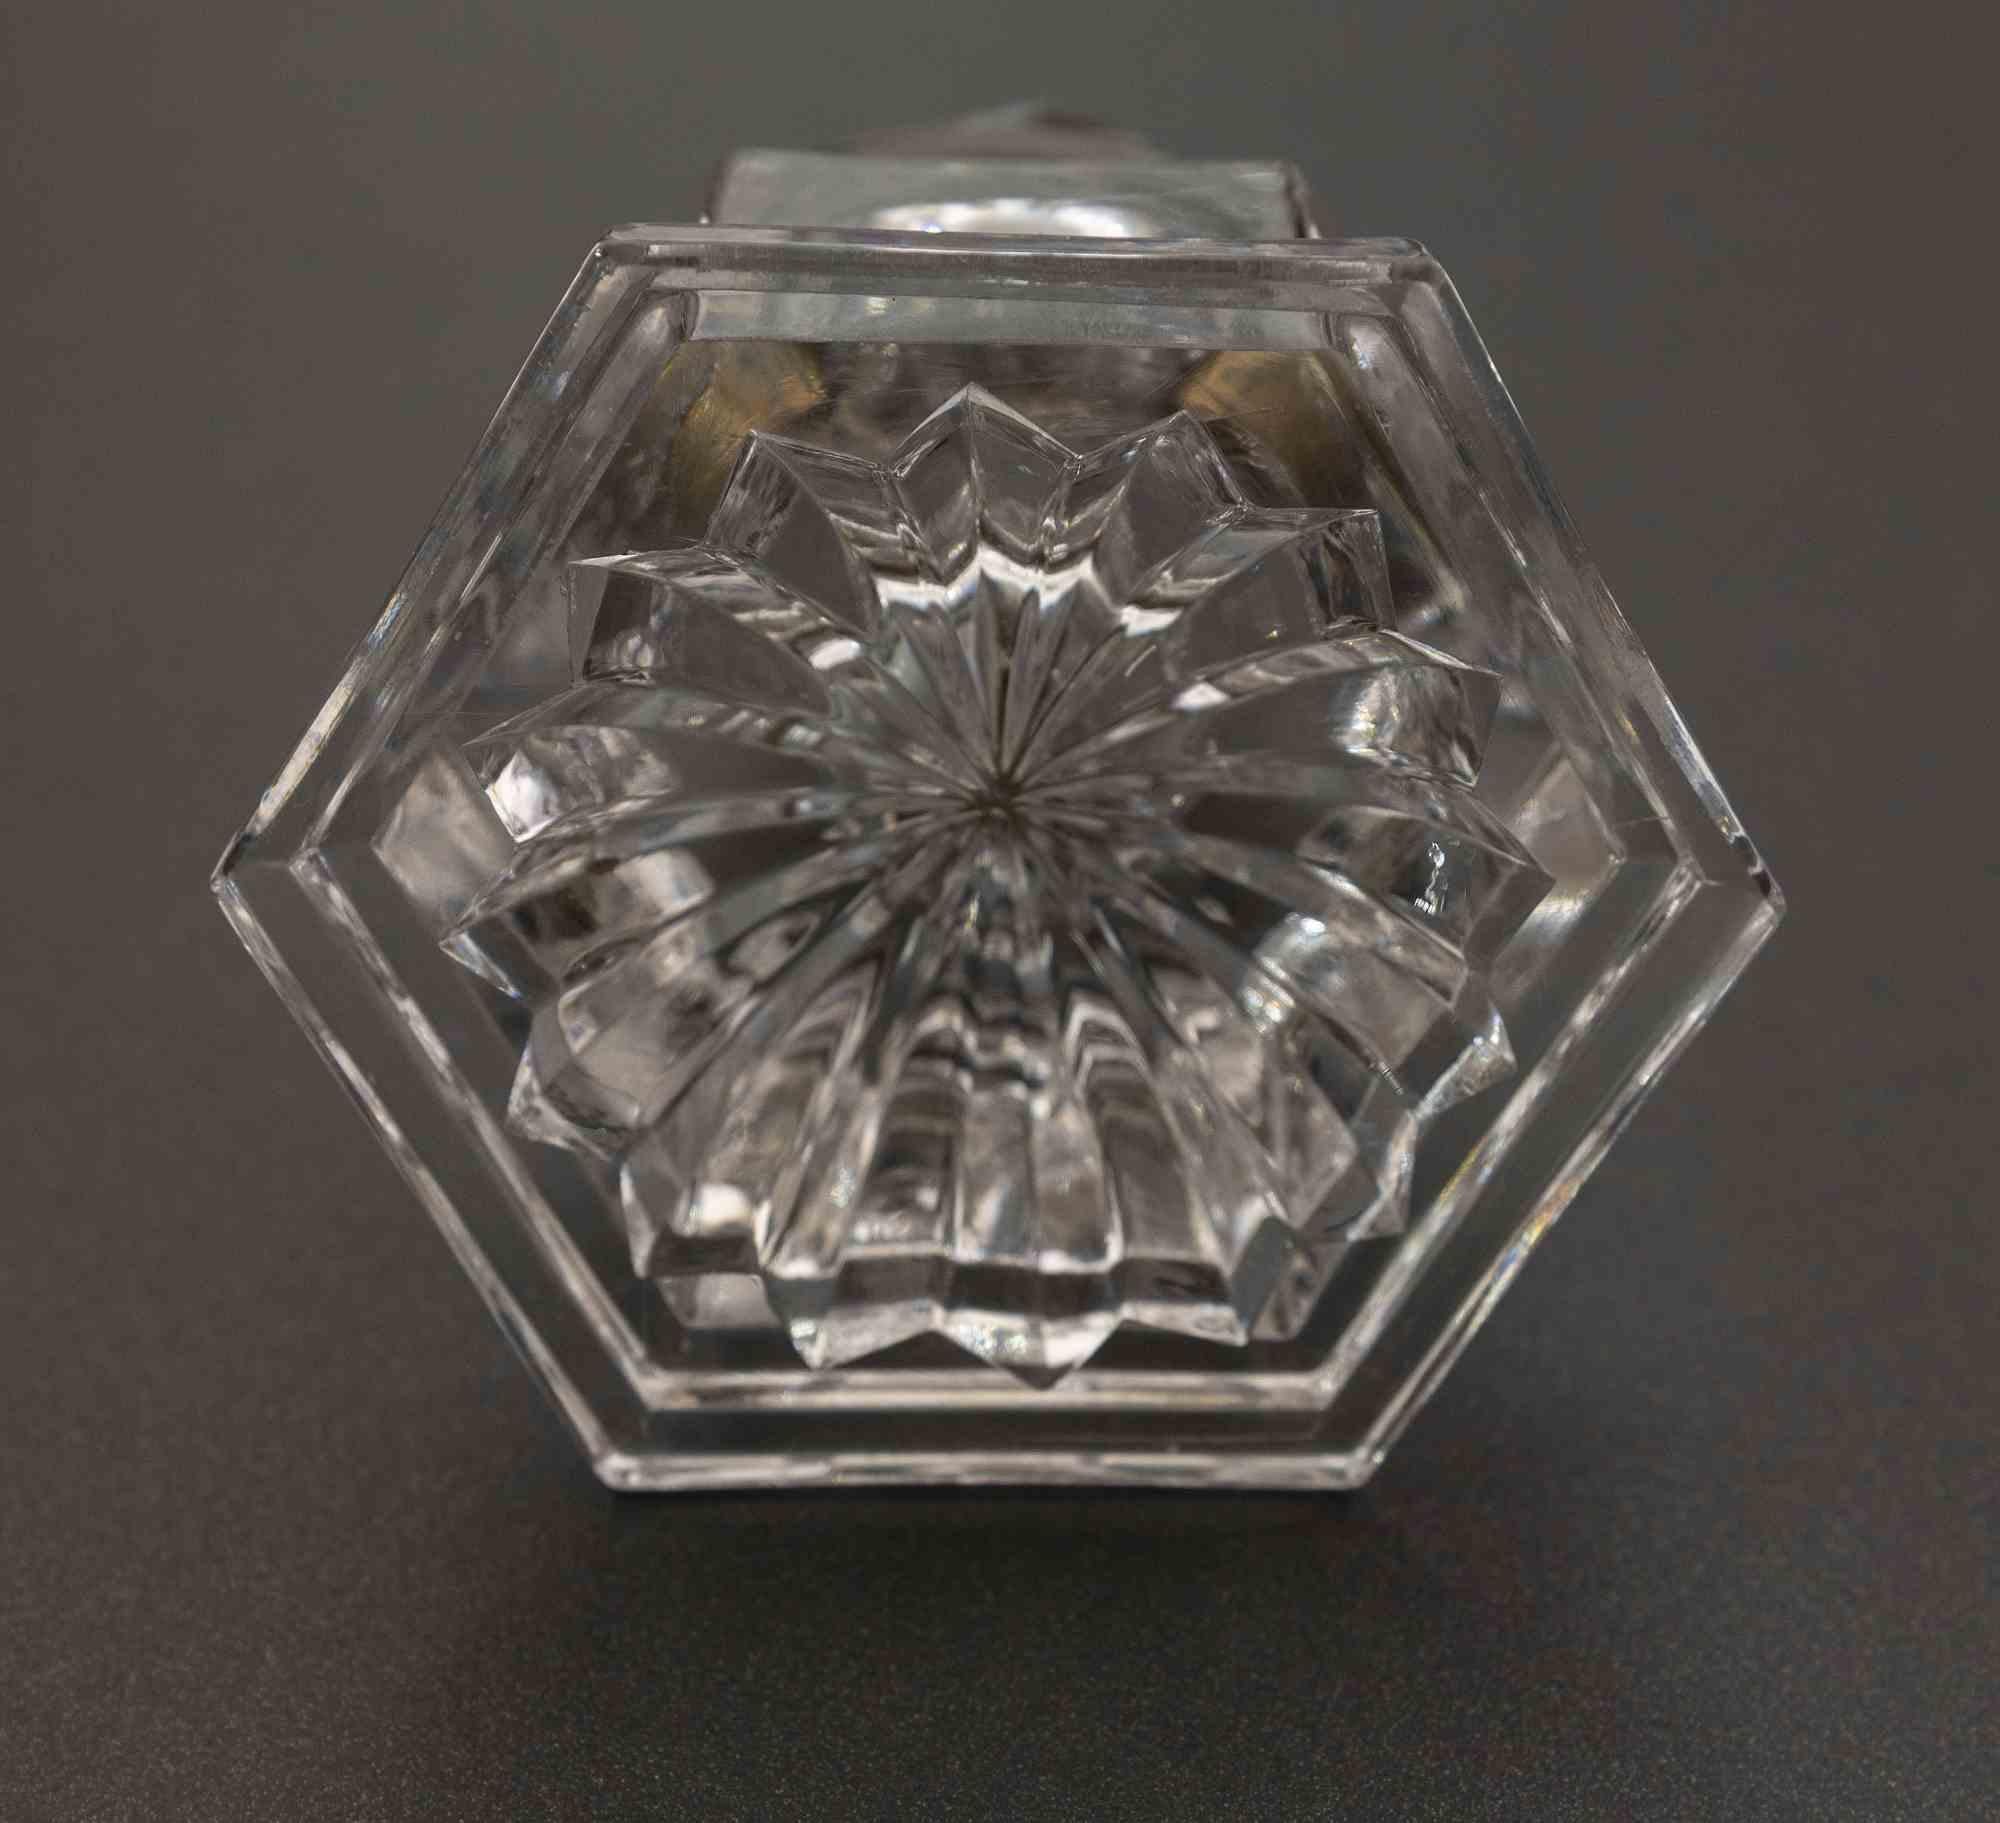 Crystal Inkwell with stopper is a beautiful decorative object.

The Inkwell is hexagonal and it is in good condition.

Light oxidation at the base of the stopper.